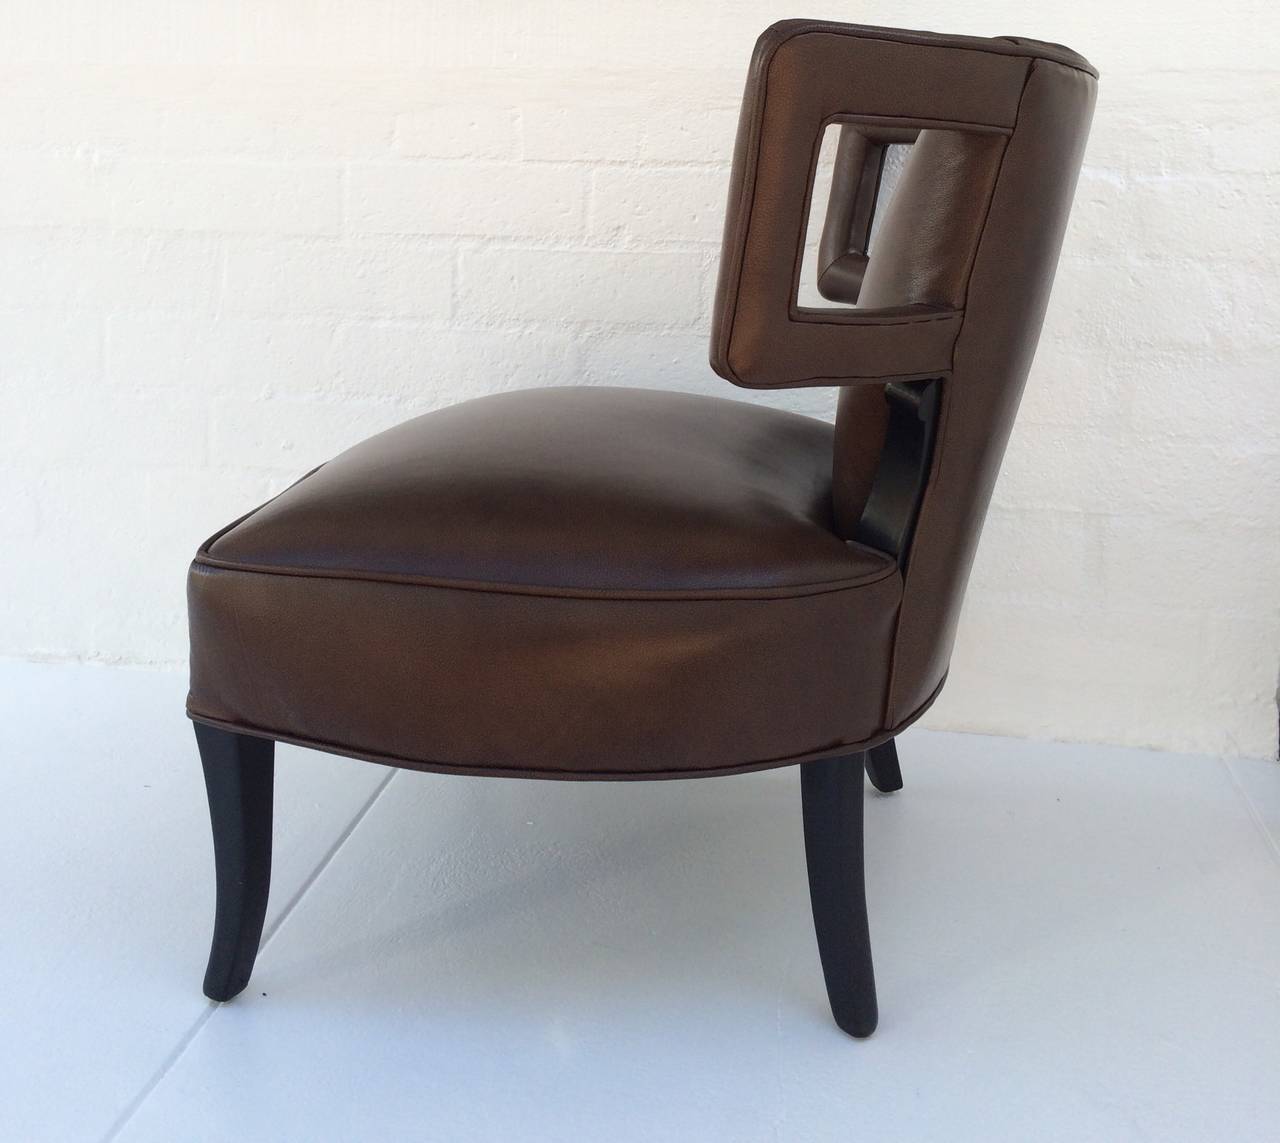 Lacquer Gorgeous Pair of Sculptural Rich Brown Leather Grosfeld House Chairs